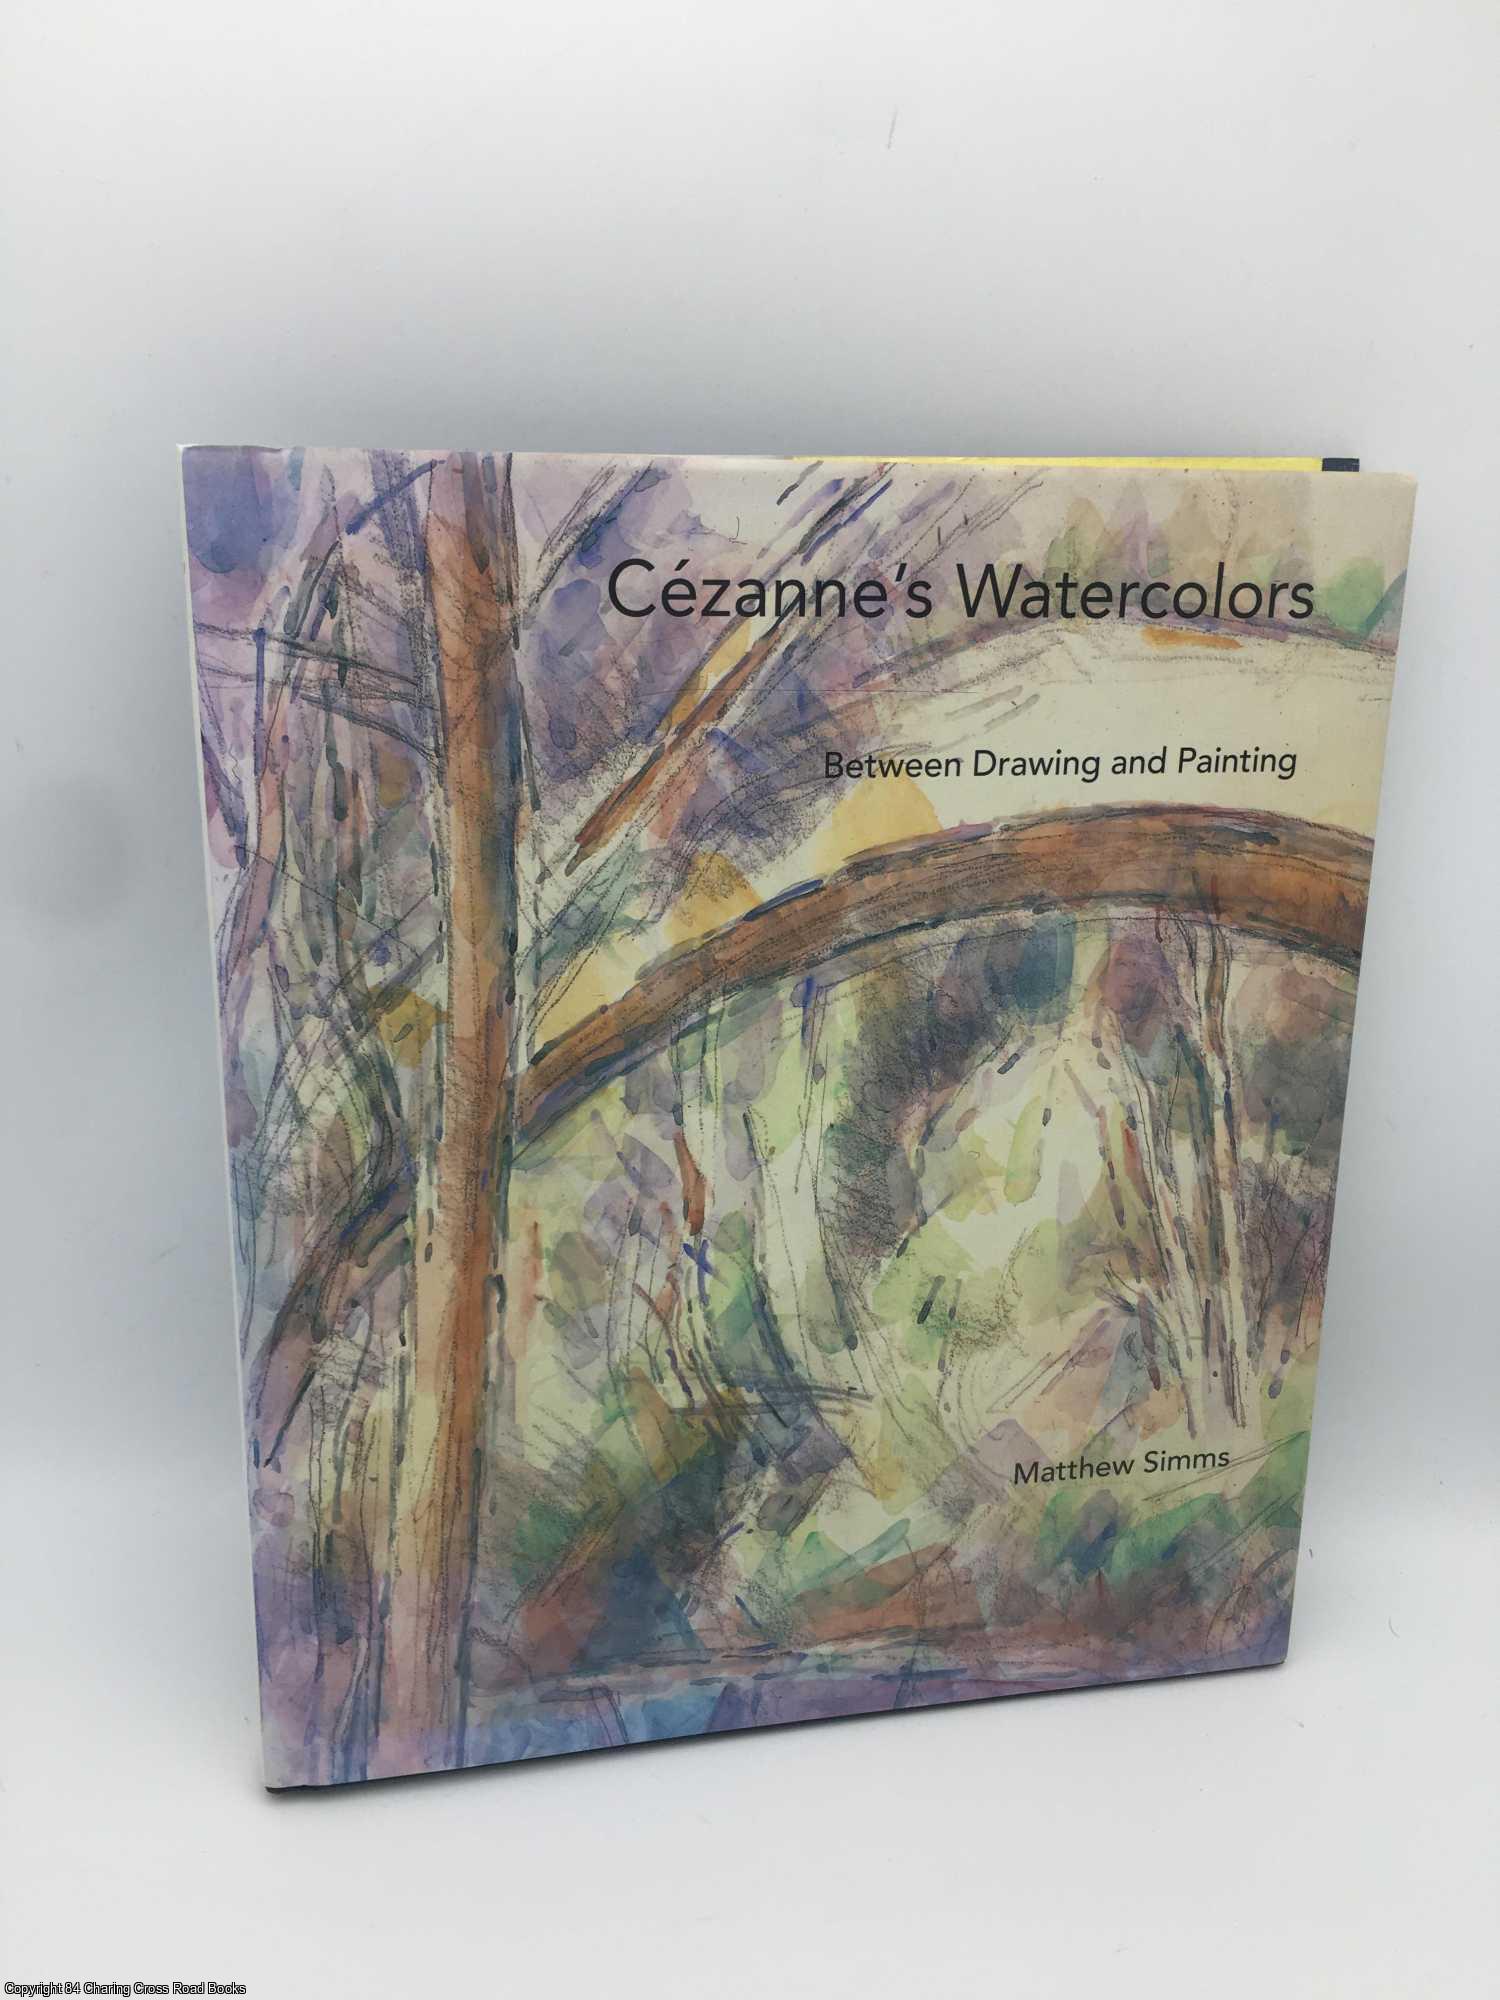 Cezanne's Watercolors: Between Drawing and Painting, Matthew Simms